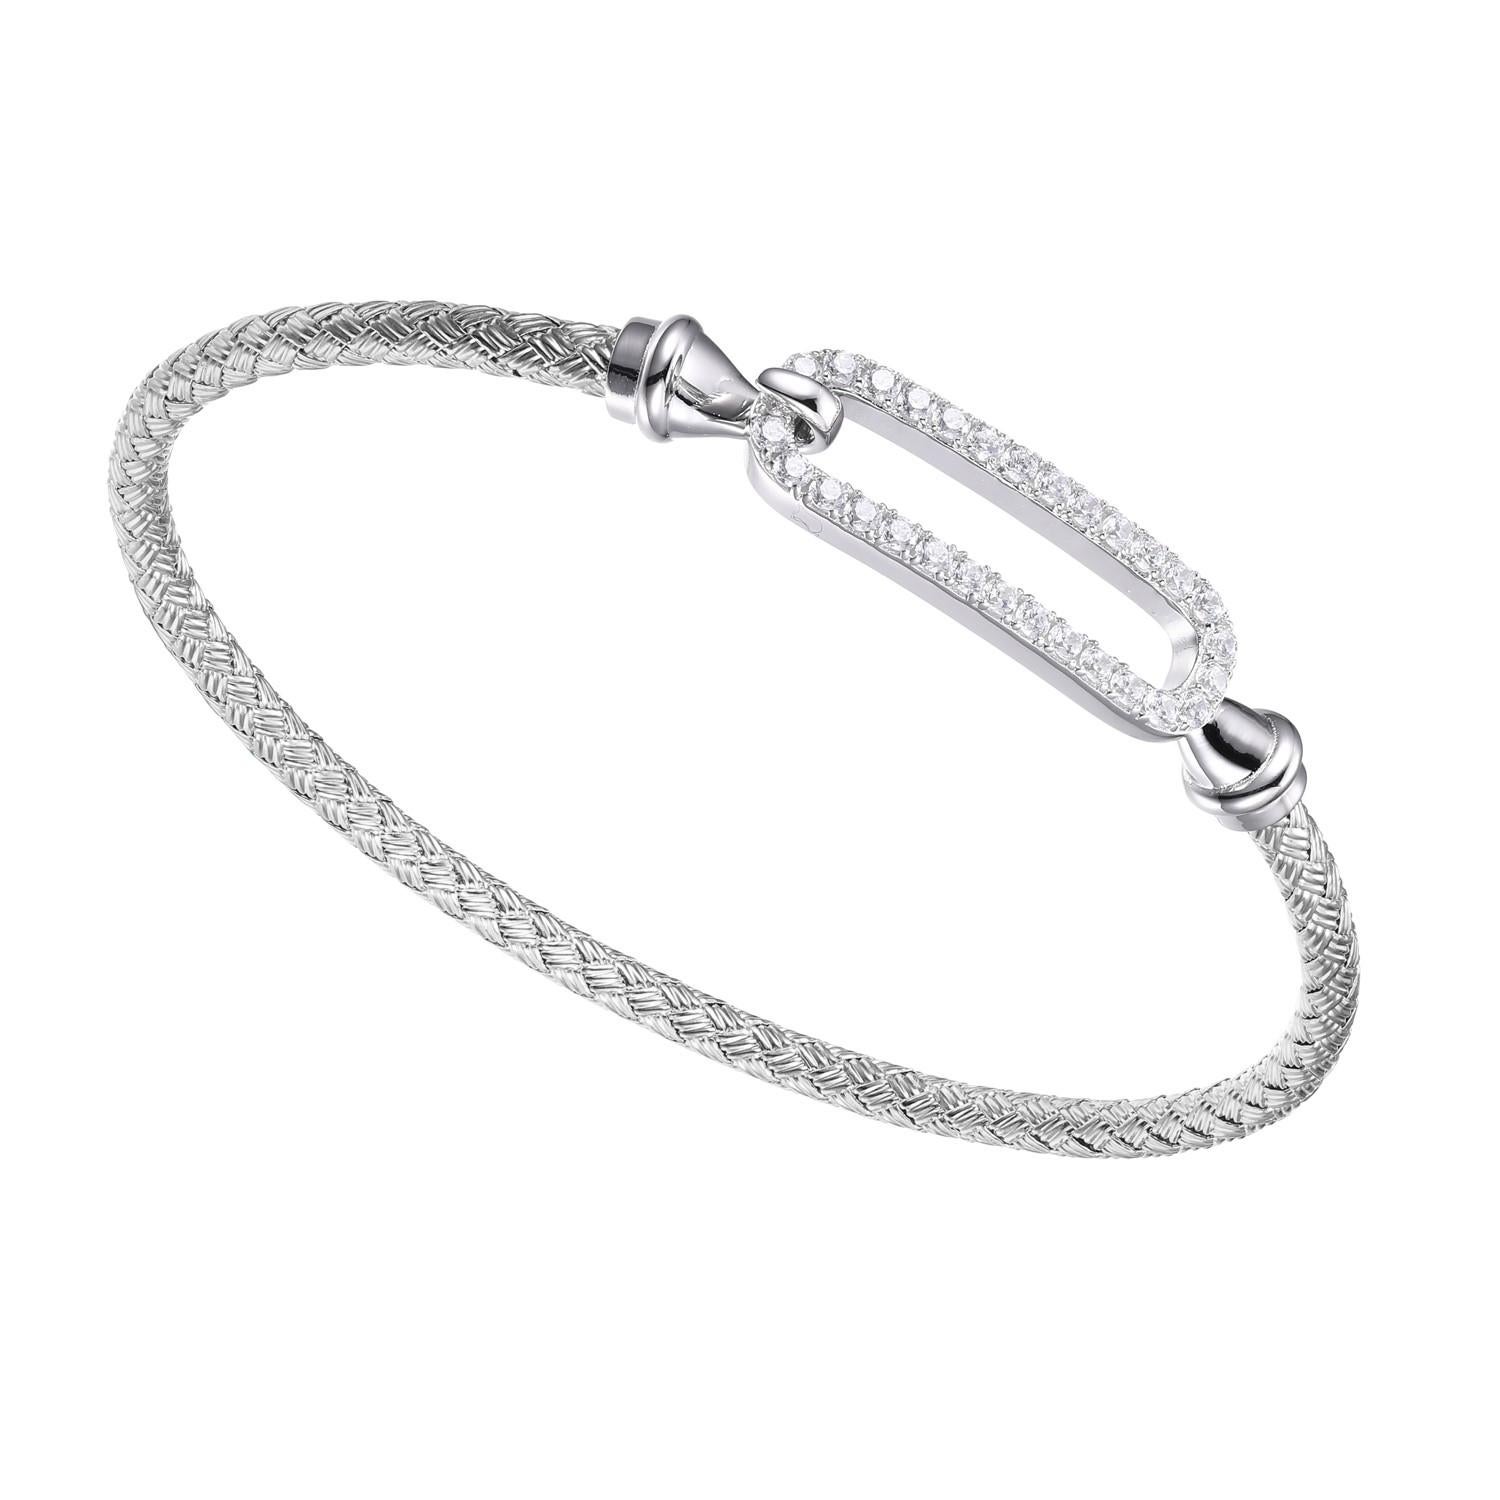 Sterling Silver 3mm Mesh Hook Bangle with CZ Link (24x8mm) in Center, Rhodium Finish